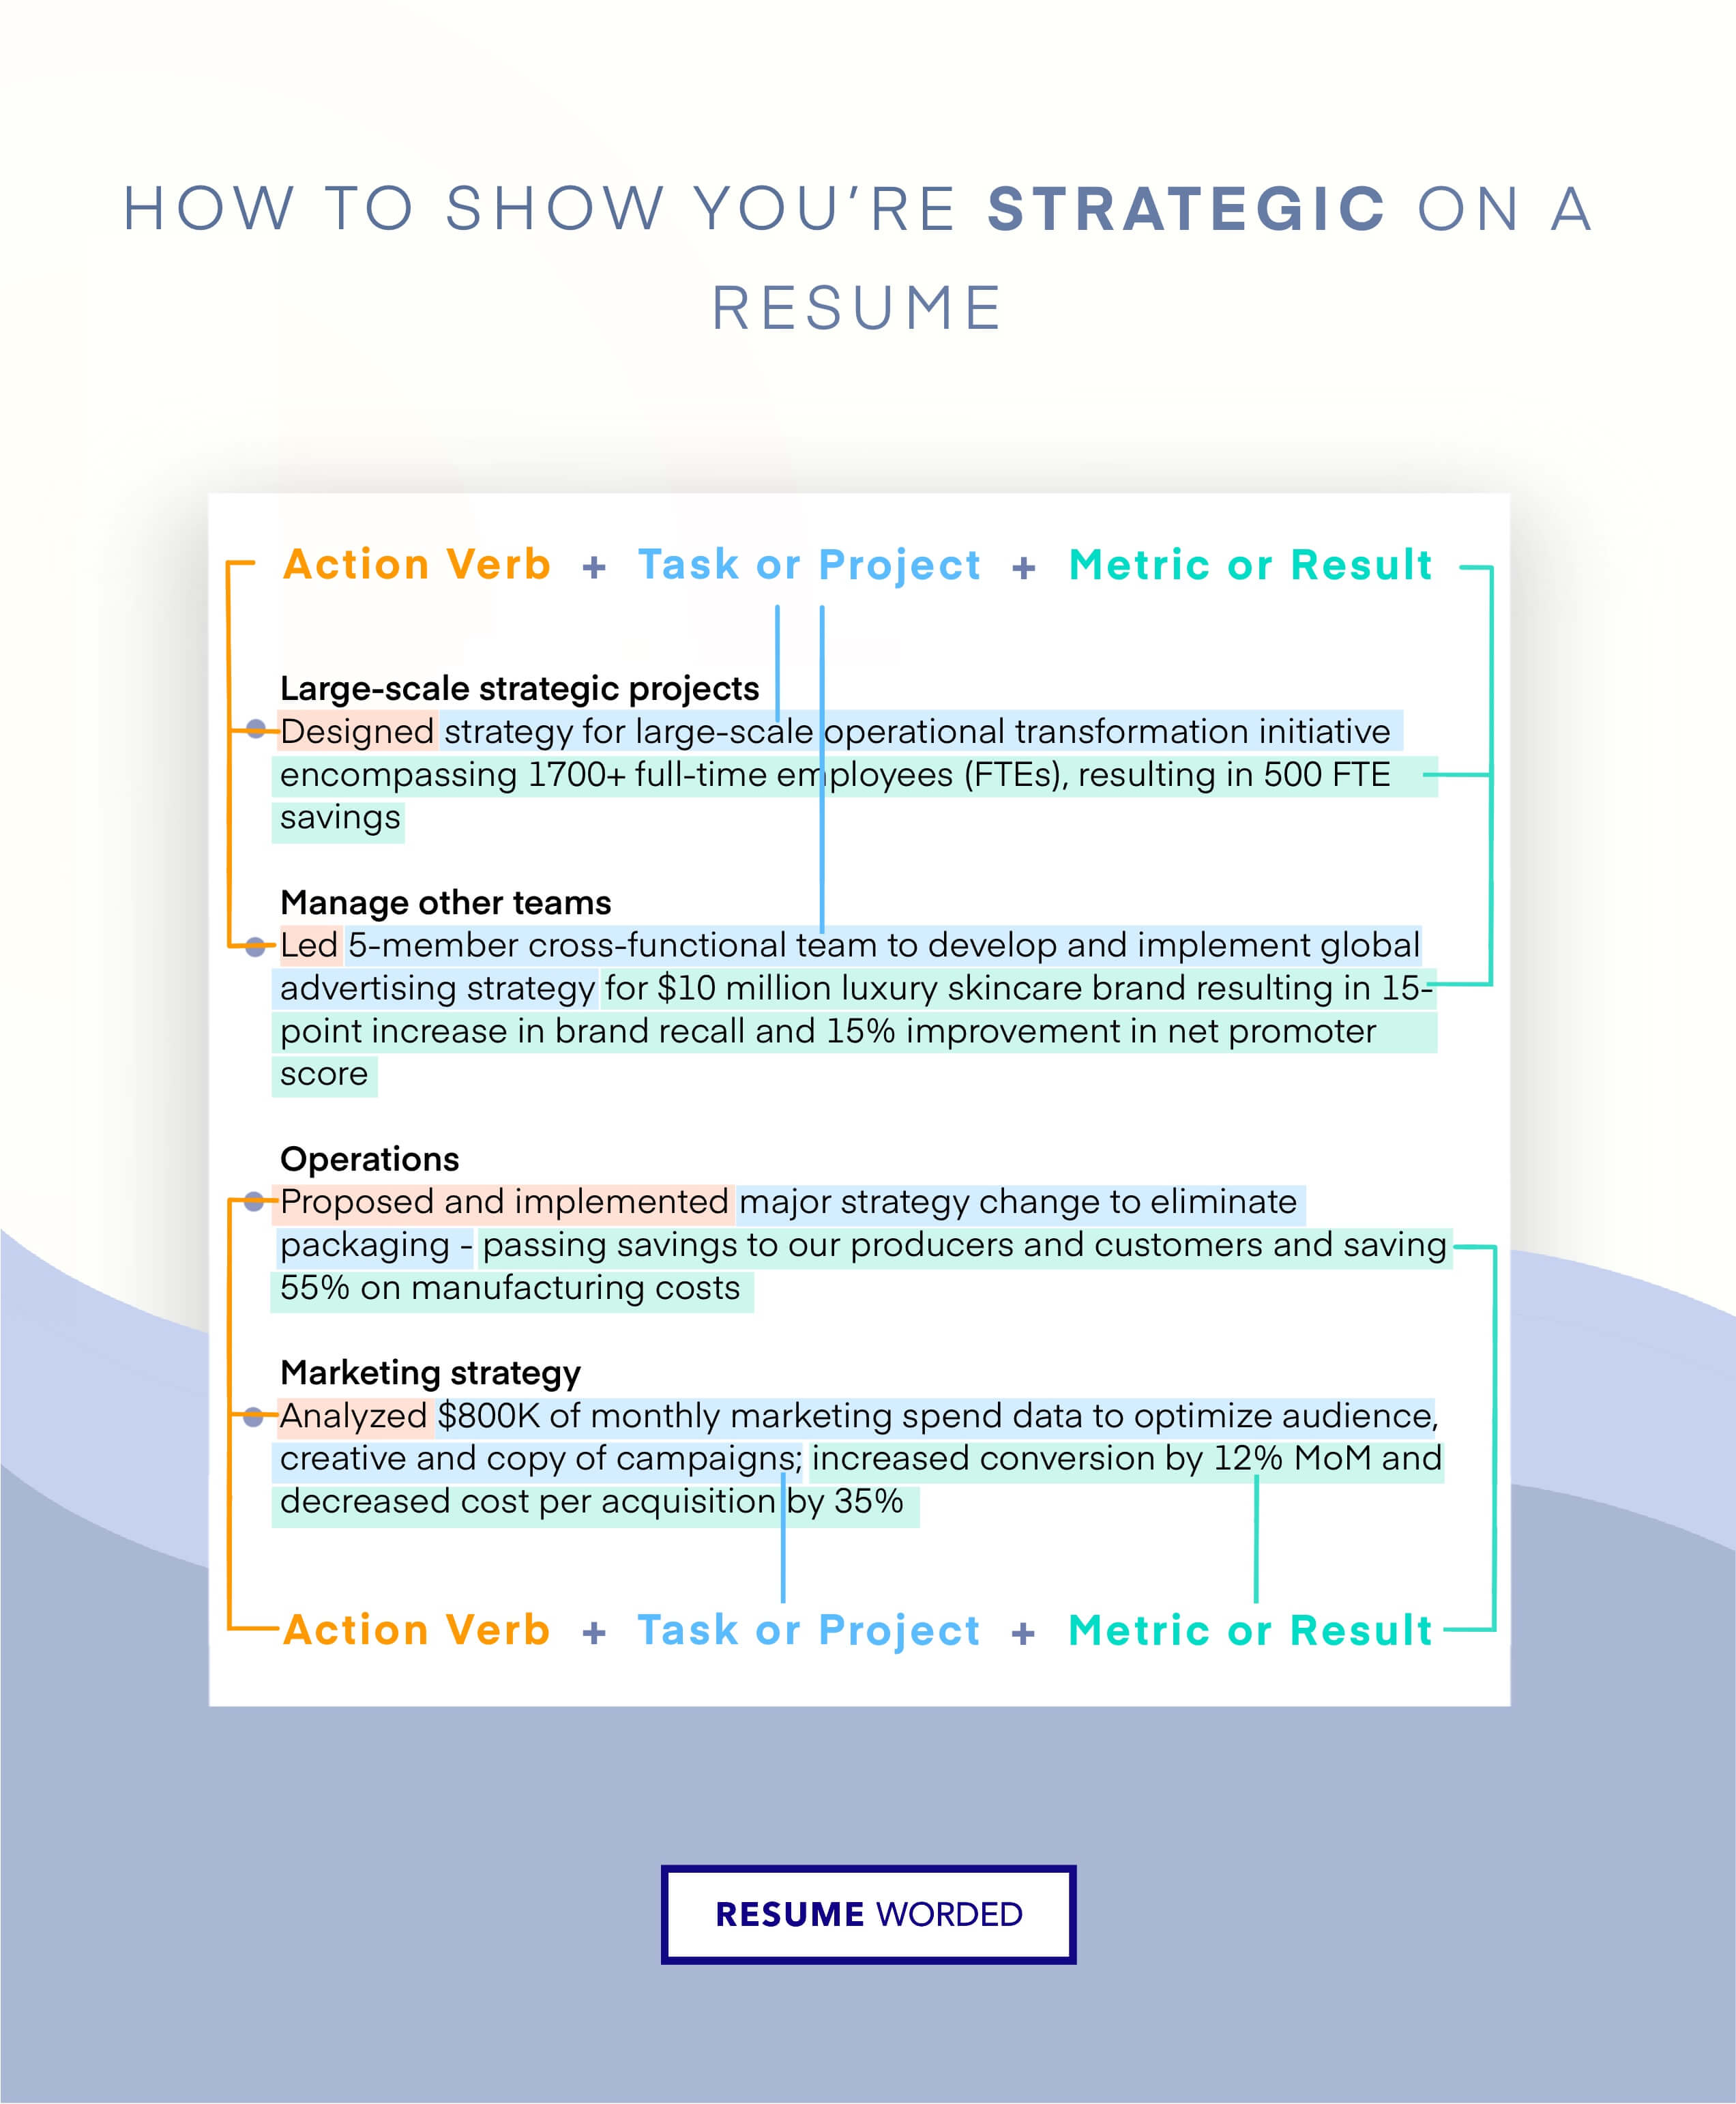 Demonstrate your leadership skills for the senior brand strategist role - Senior Brand Strategist Resume